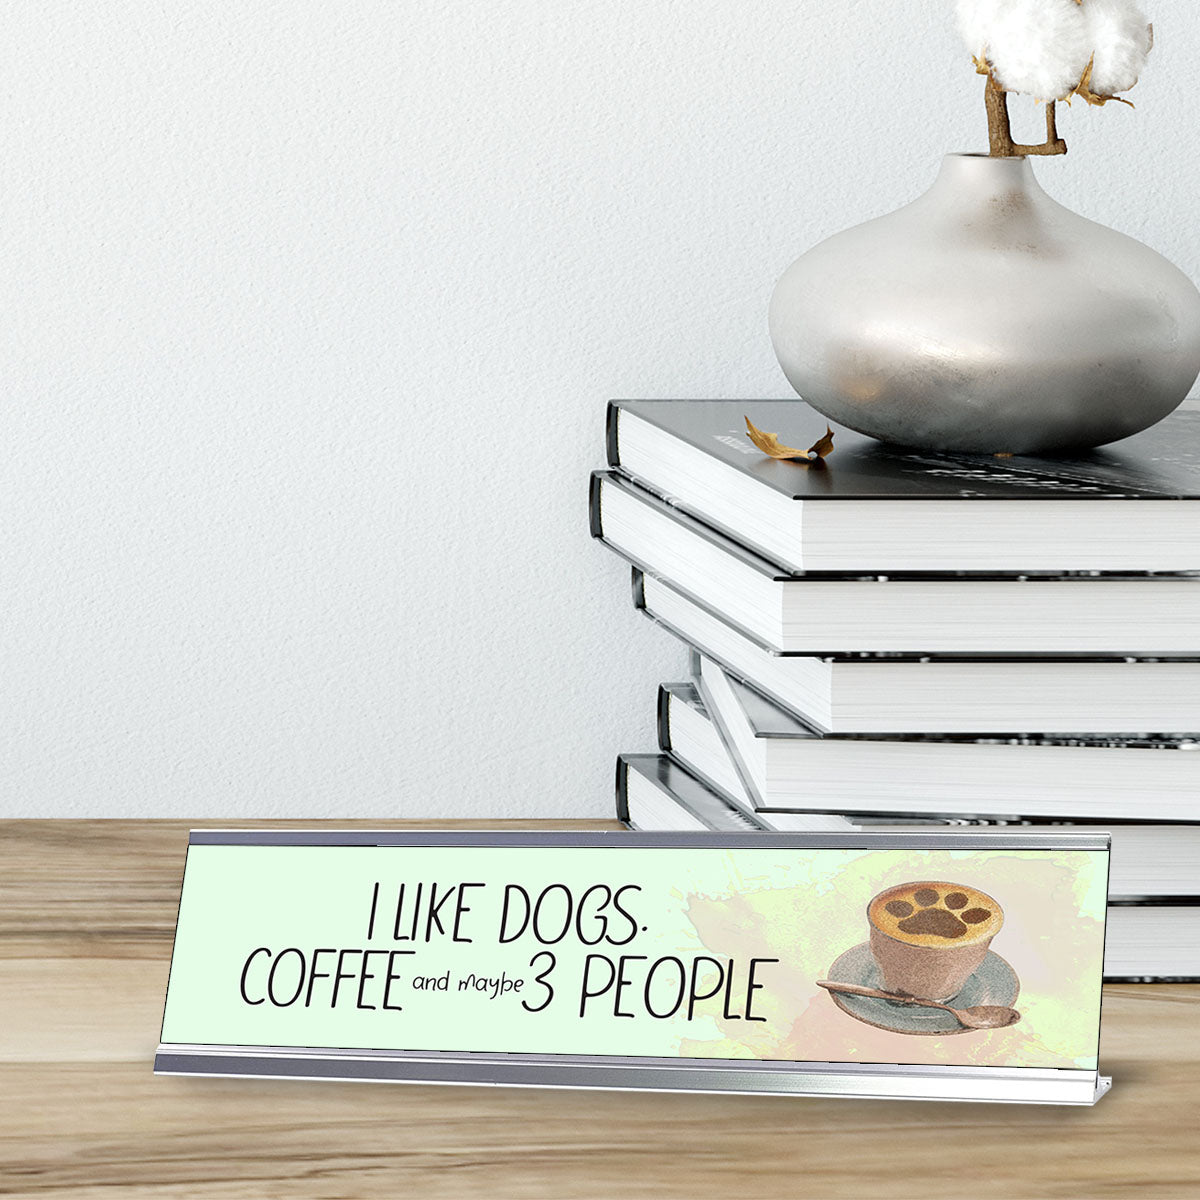 I like dogs. Coffee and maybe 3 people, Designer Nameplate Desk Sign (2 x 8")